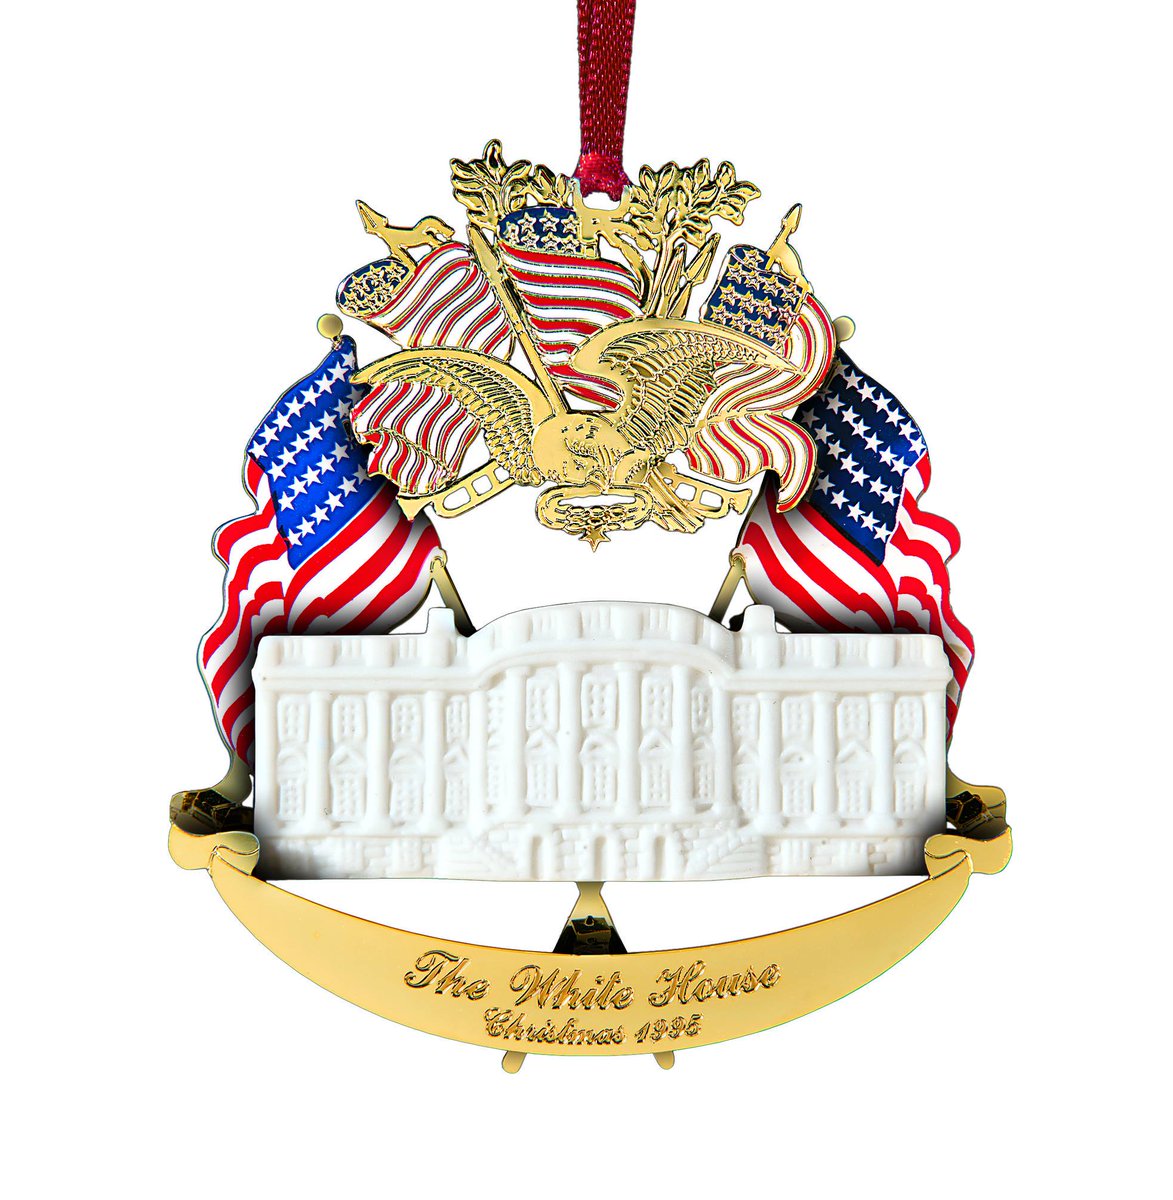 The 1995 Official White House Christmas Ornament honors the 12th president, Zachary Taylor. The patriotic theme reflects his service and is inspired by the ceremonies he attended on the grounds of the Washington Monument on July 4, 1850. https://shop.whitehousehistory.org/holidays/ornaments/1994-to-1997-white-house-christmas-ornaments-sold-as-a-set-of-four